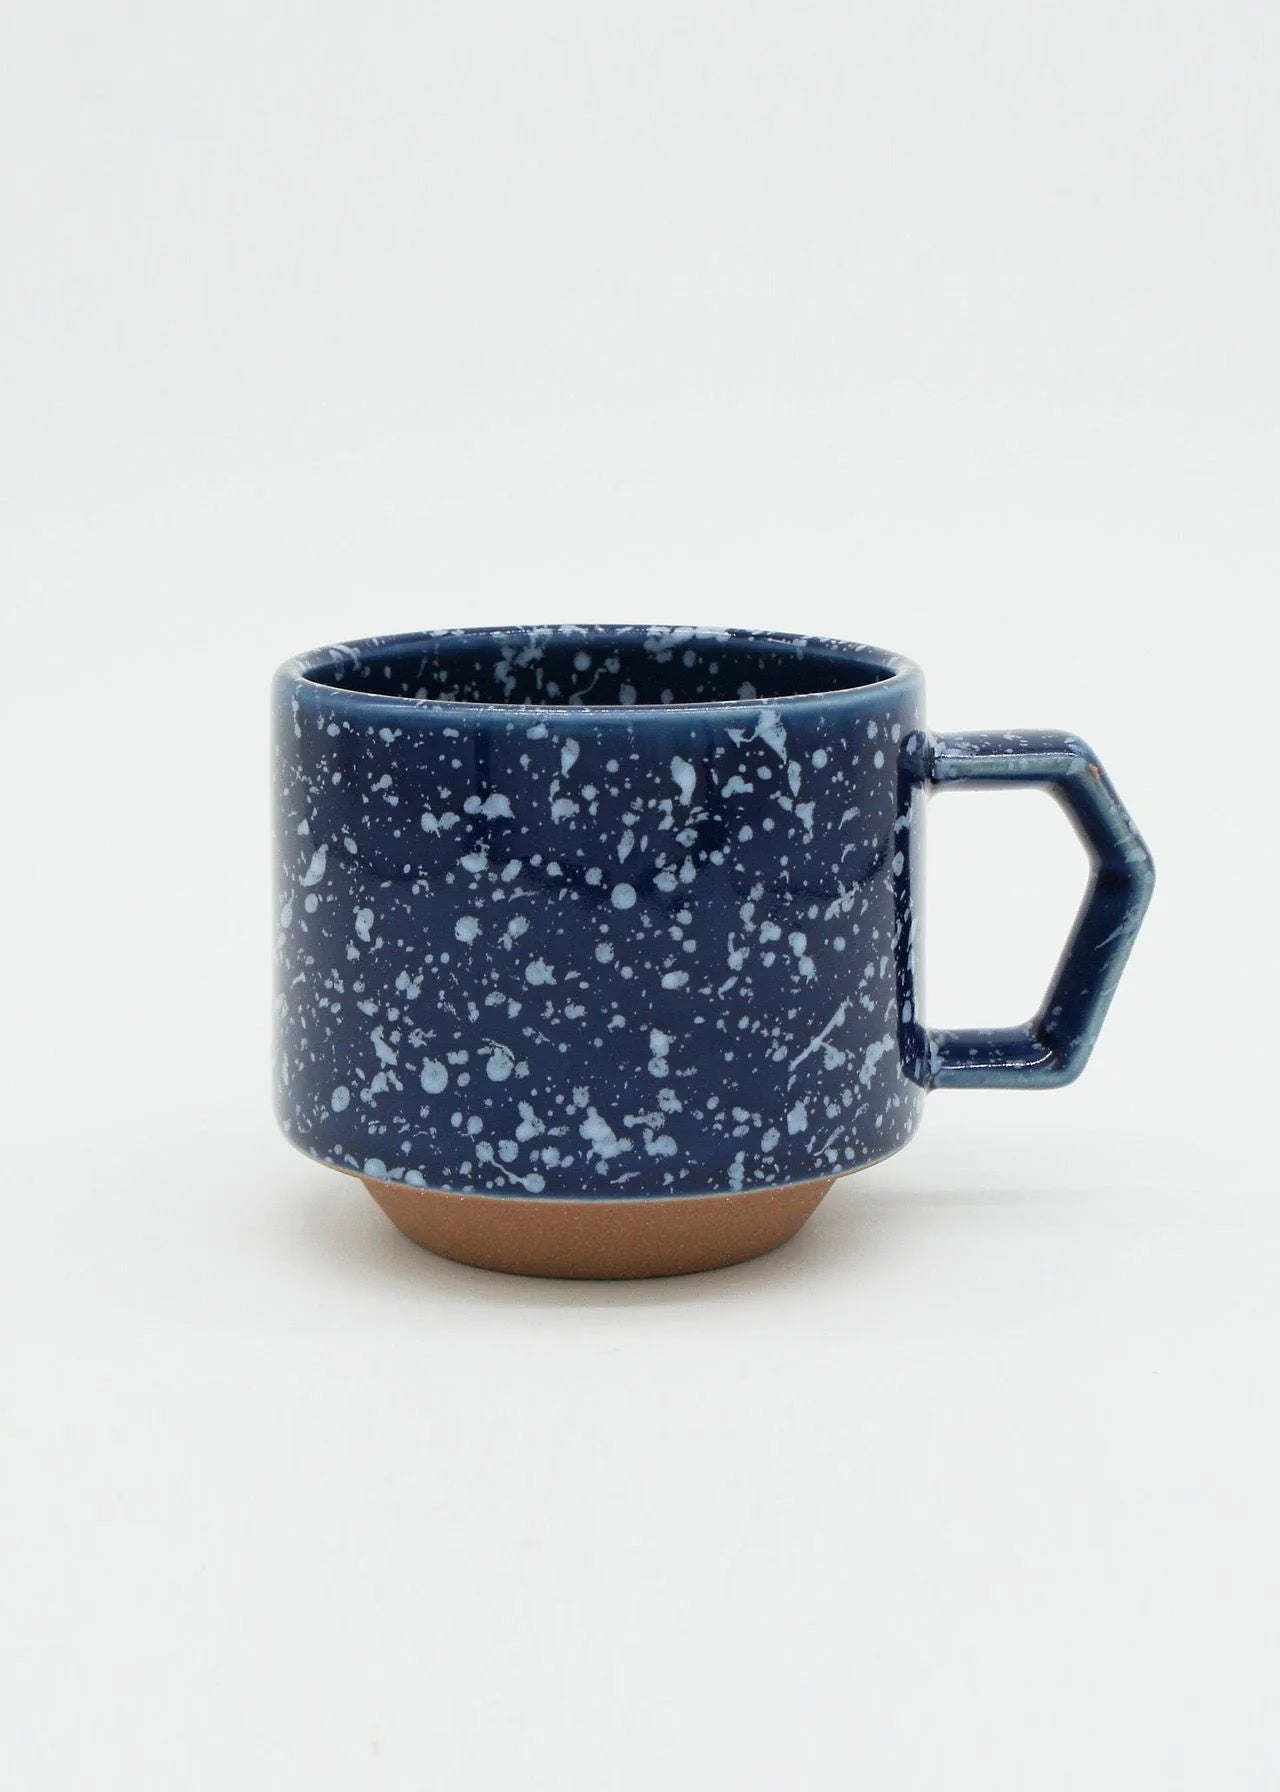 A CHIPS Inc. stackable blue speckled Stacking Mug - Speckled Navy coffee cup.